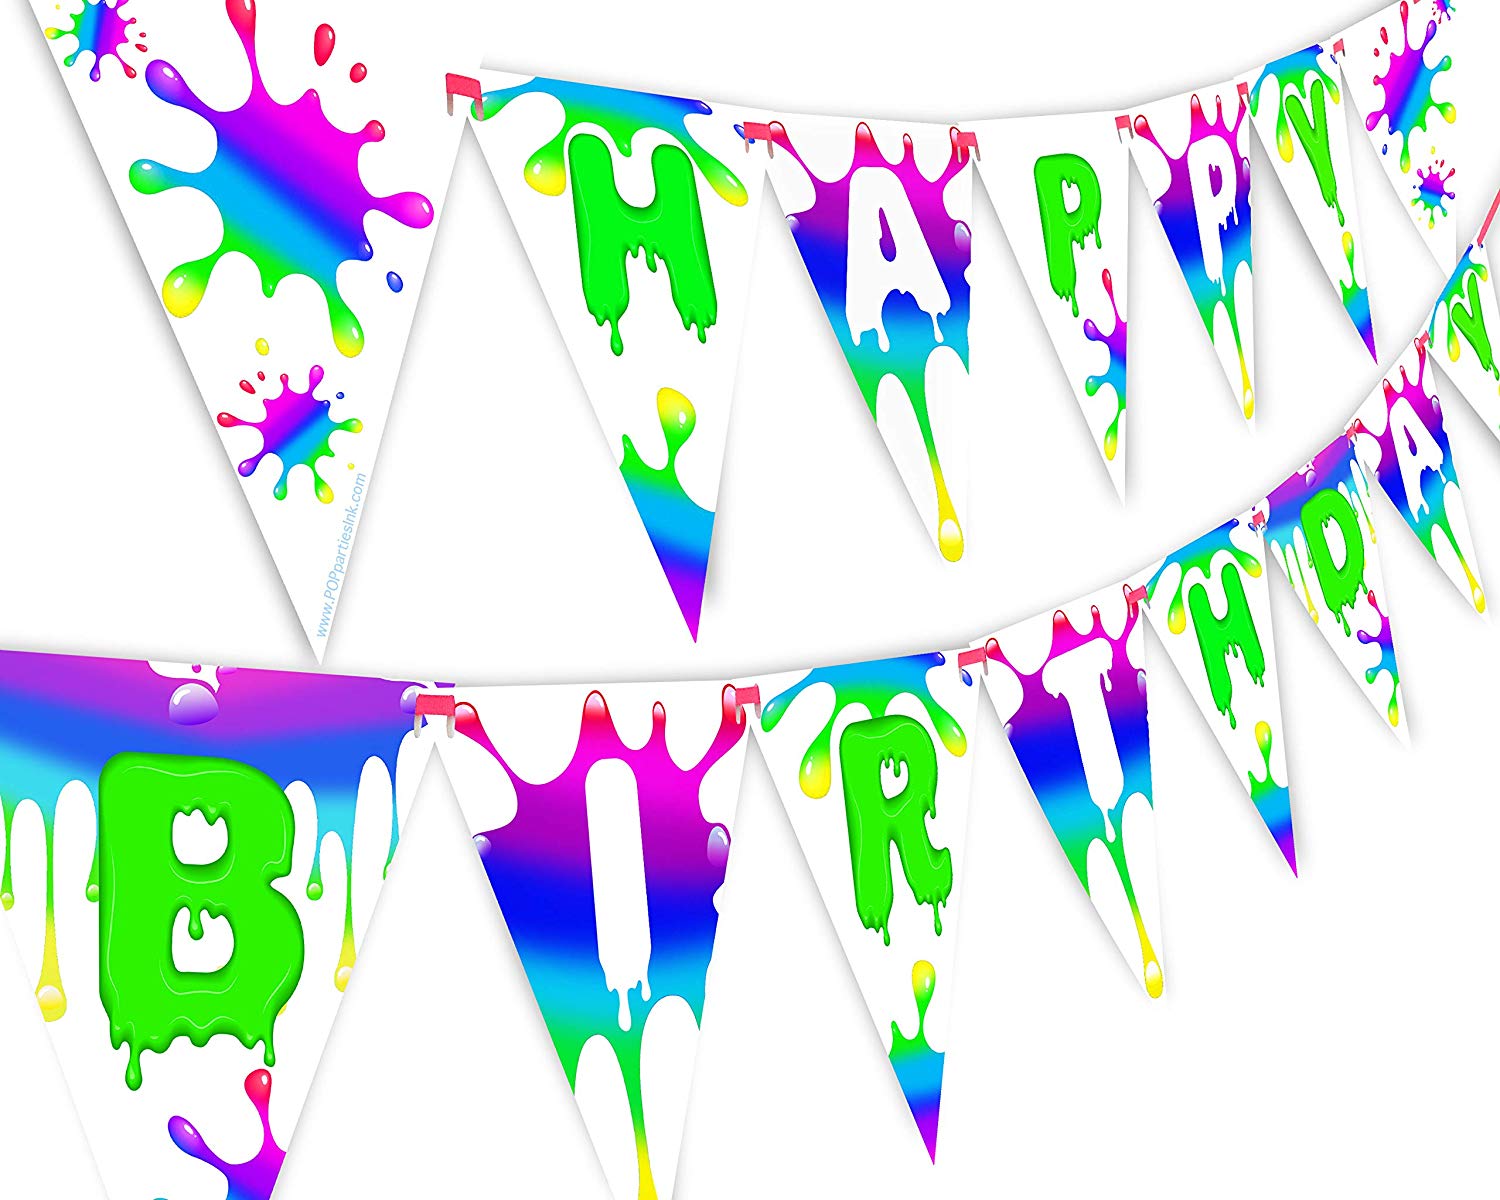 Slime Green Happy Birthday Banner Pennant - Slime Party Decorations - Art Party Supplies - Slime Party Supplies - Green